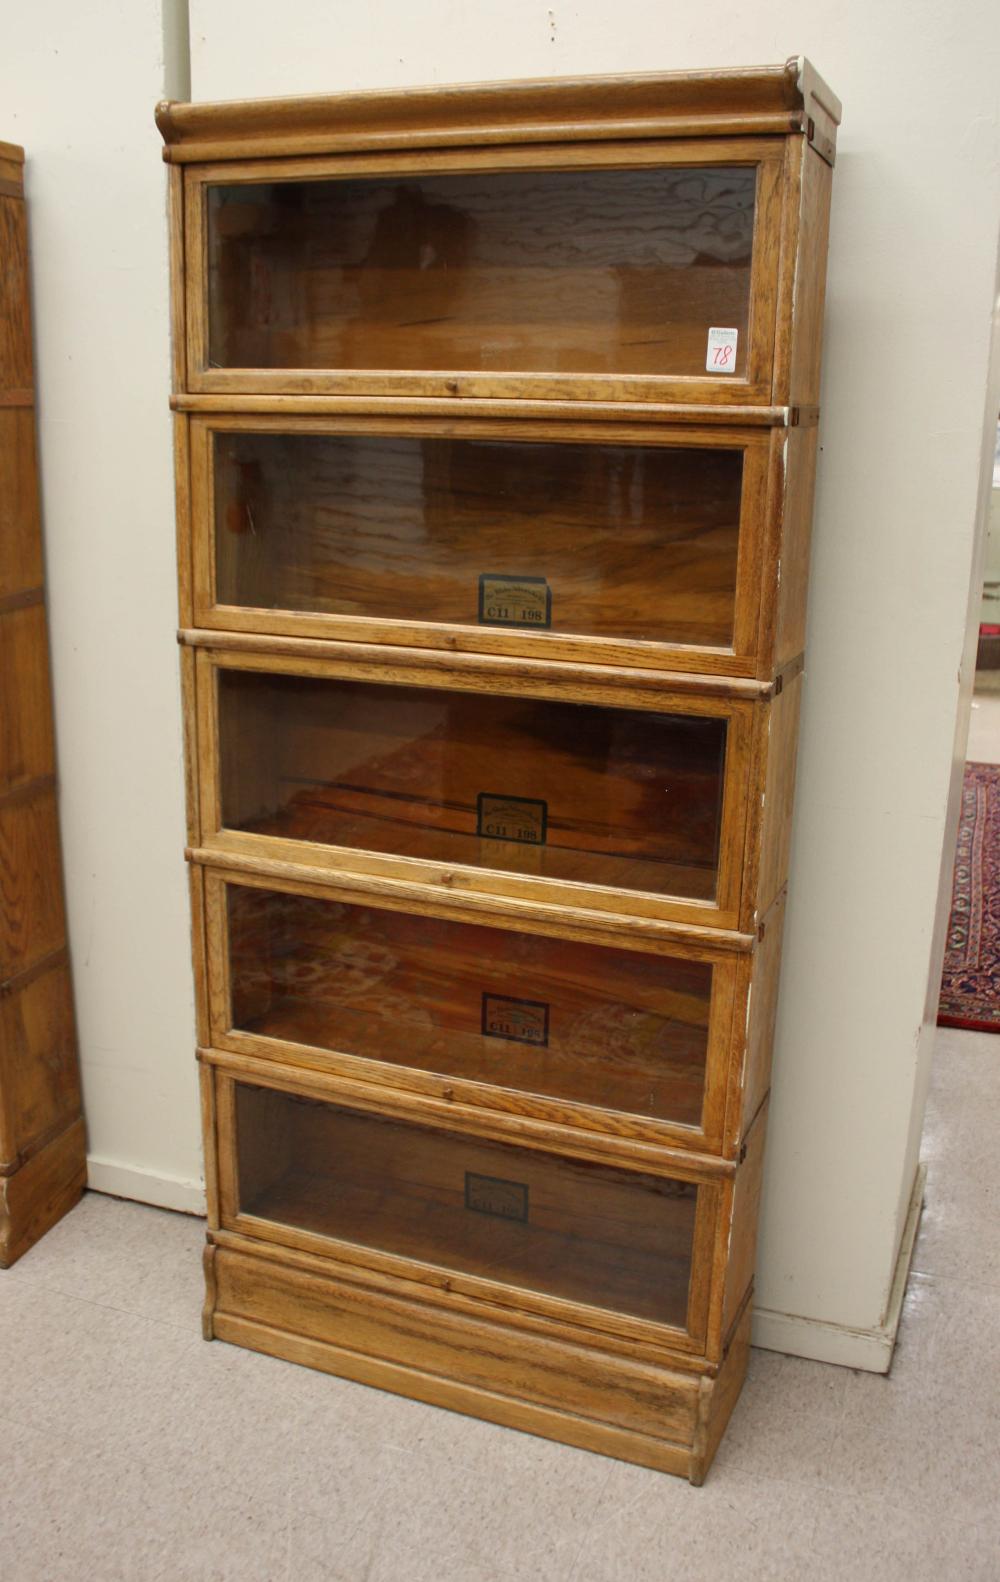 FIVE-SECTION STACKING OAK BOOKCASE,